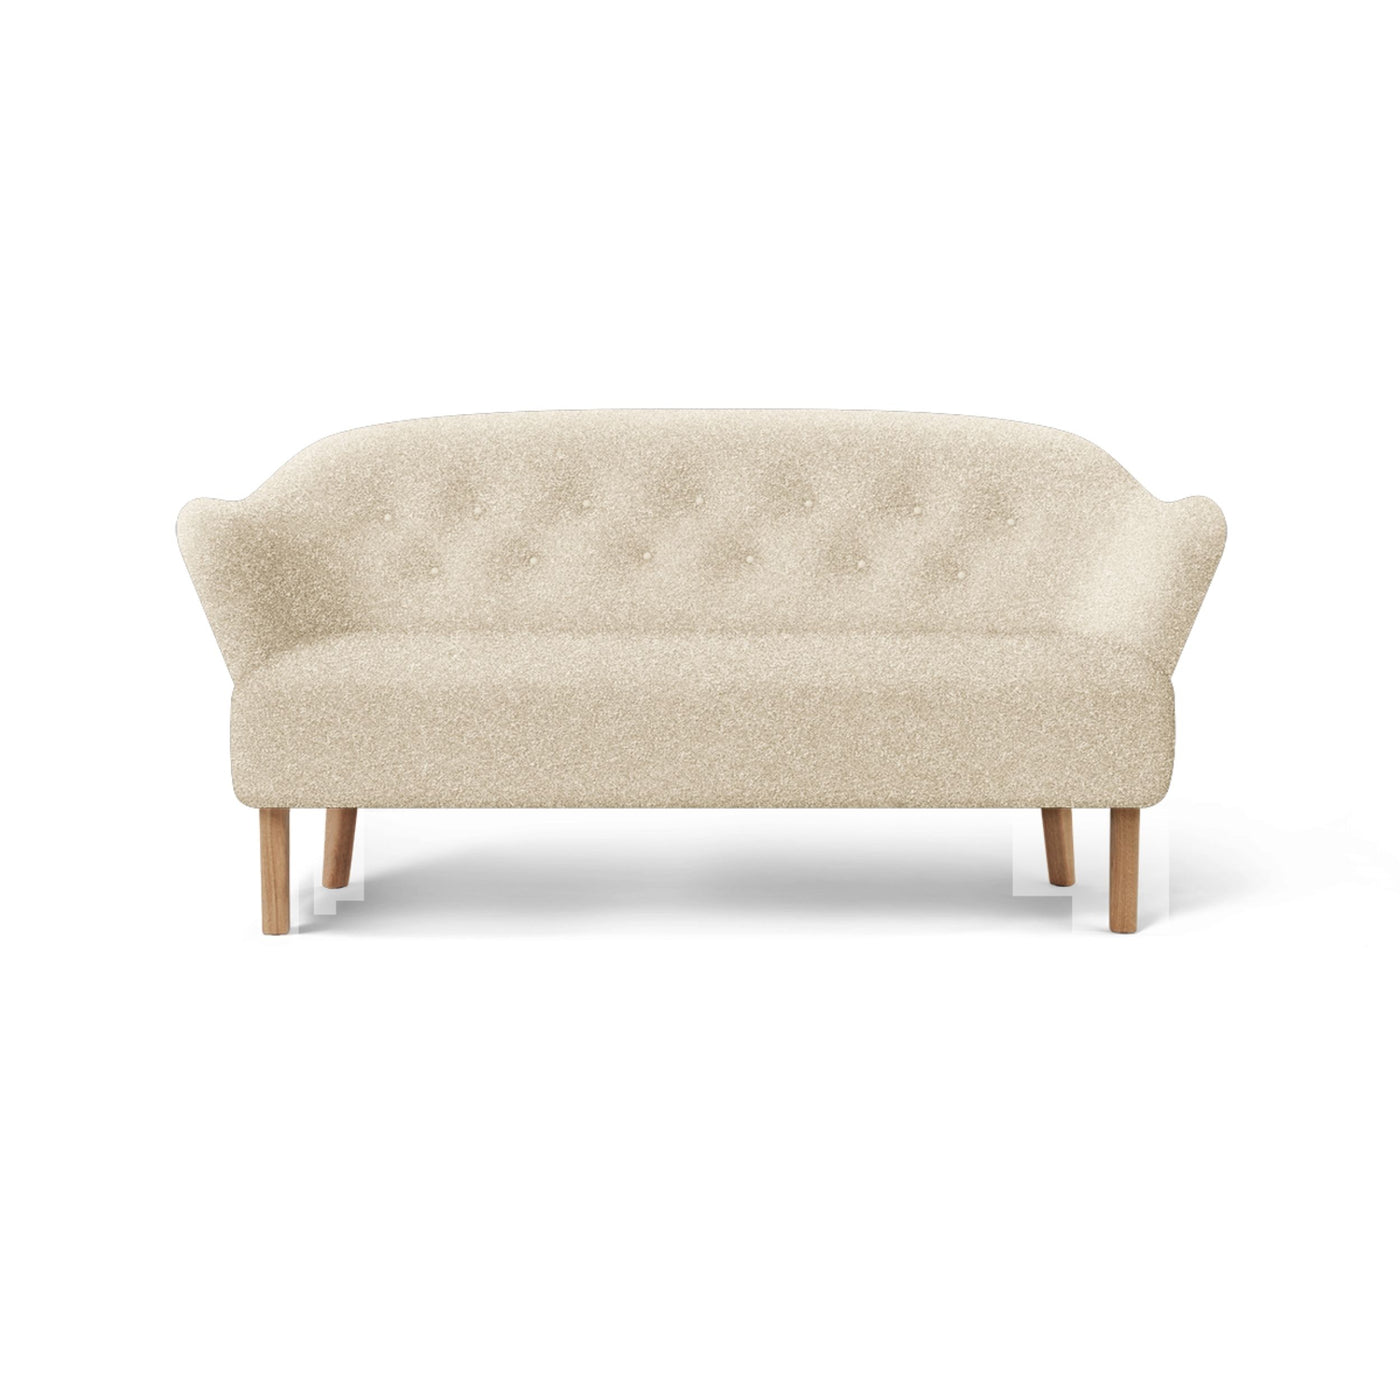 By Lassen Ingeborg sofa with natural oak legs. Made to order from someday designs. #colour_sahco-zero-1